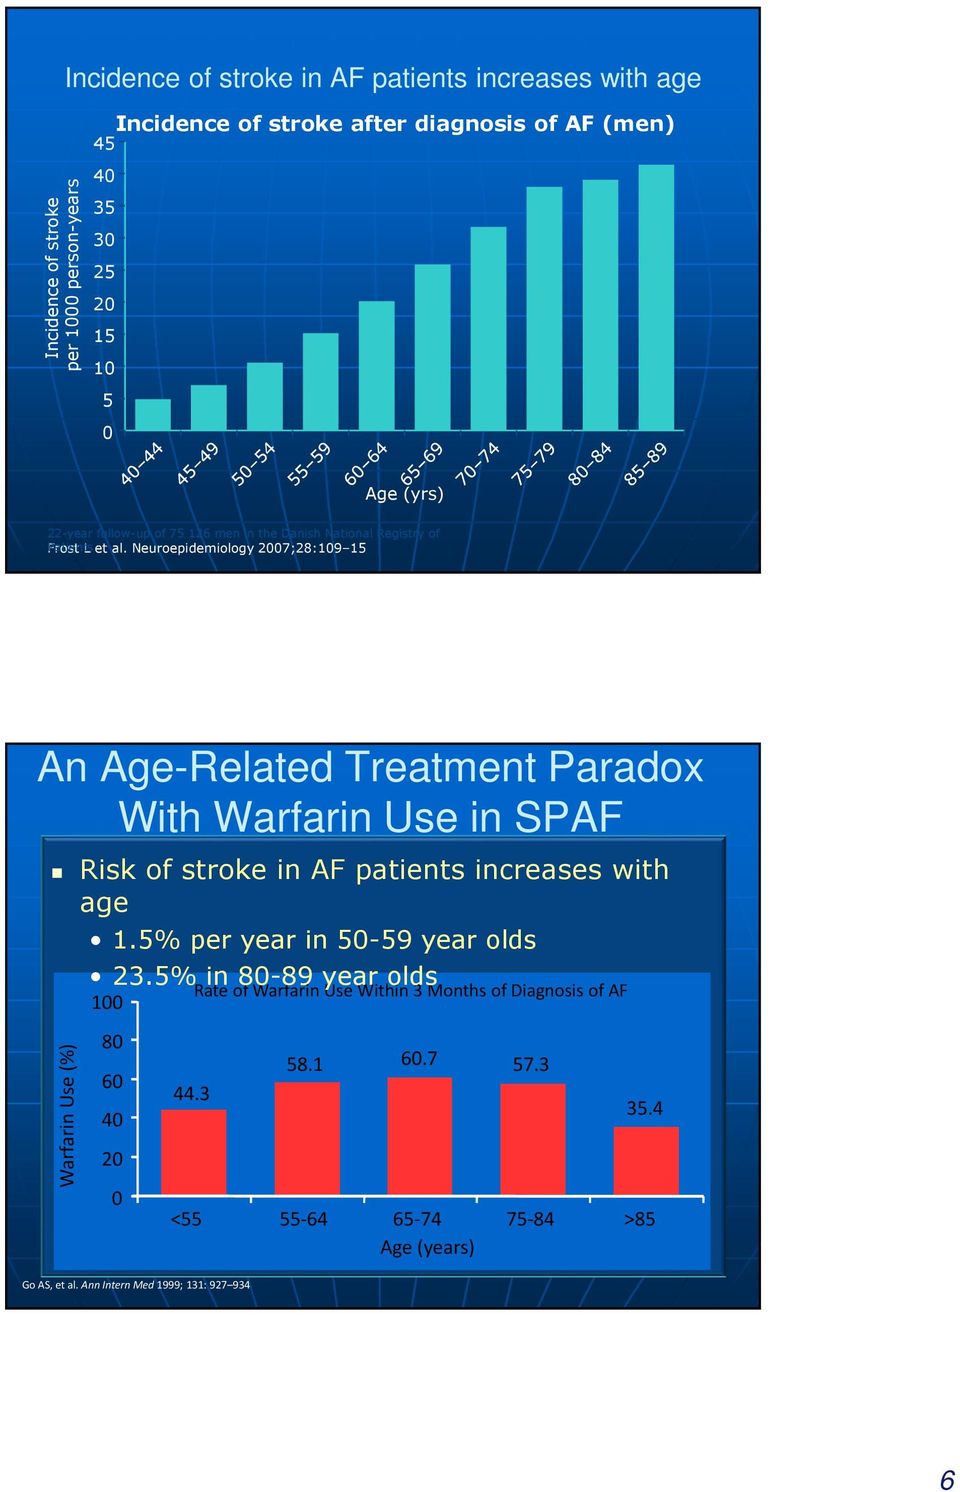 Neuroepidemiology 2007;28:109 15 An Age-Related Treatment Paradox With Warfarin Use in SPAF Risk of stroke in AF patients increases with age Warfarin Use (%) 1.